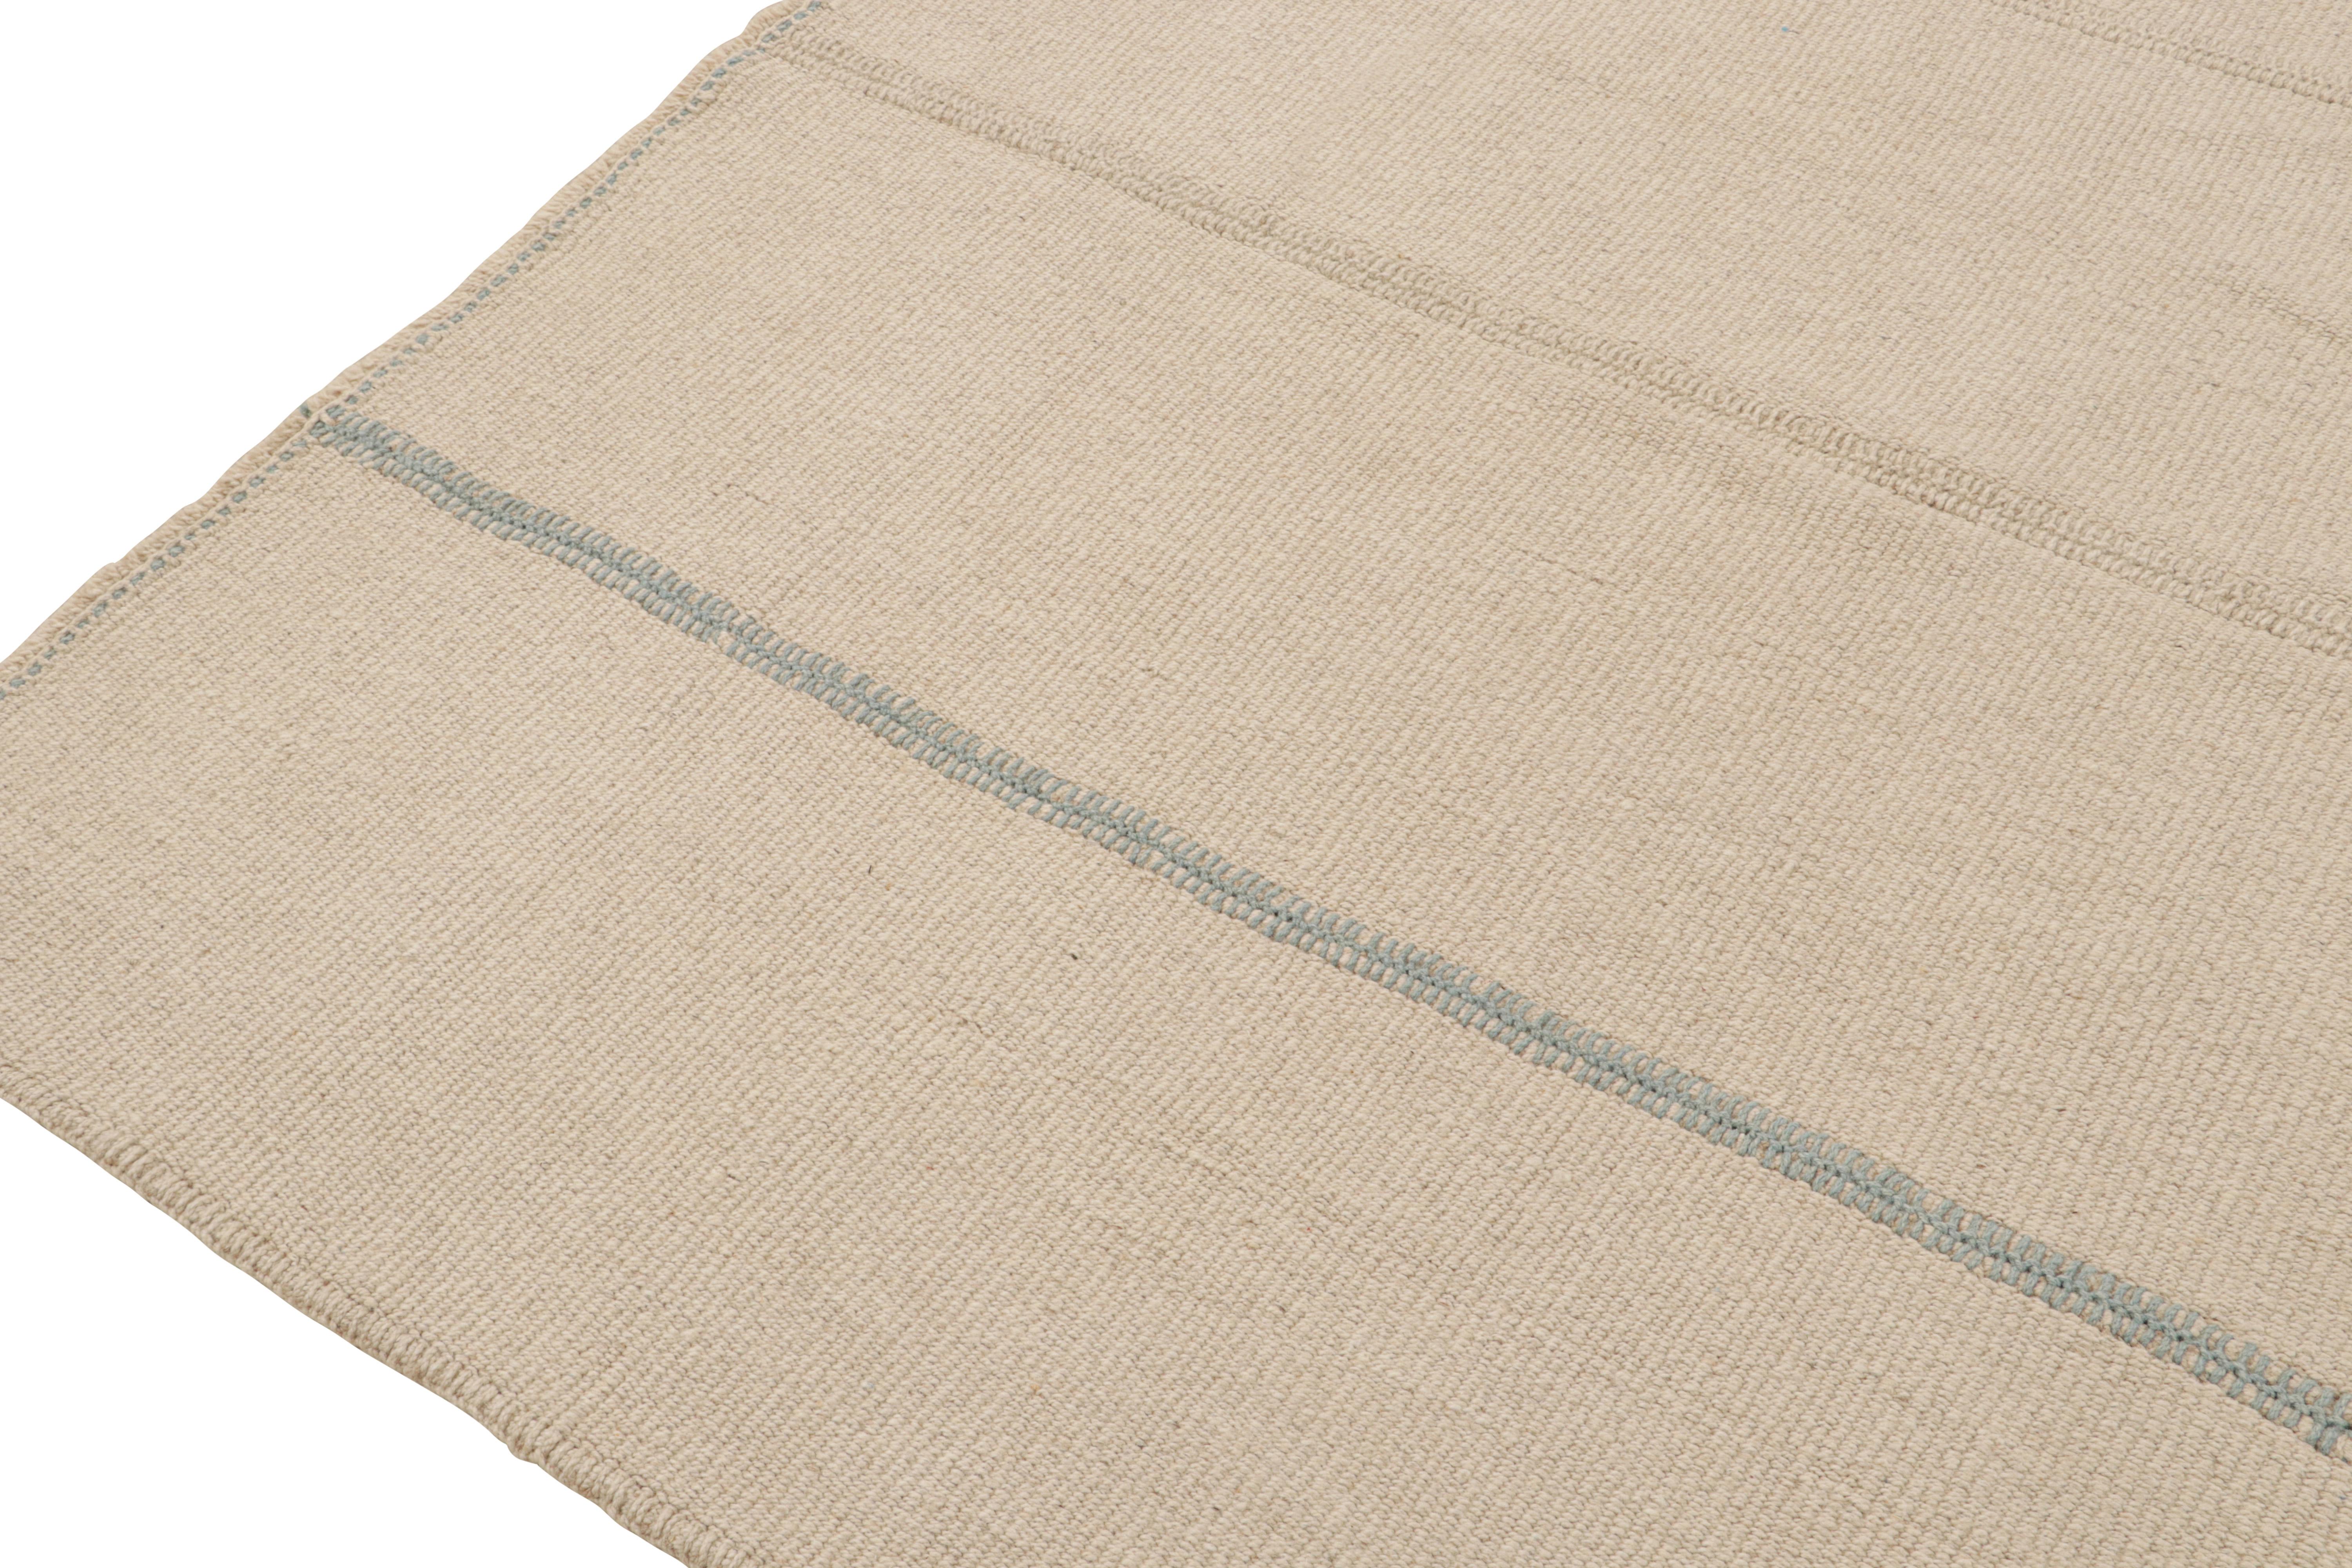 Rug & Kilim’s Contemporary Kilim in Beige and Blue Muted Stripes In New Condition For Sale In Long Island City, NY